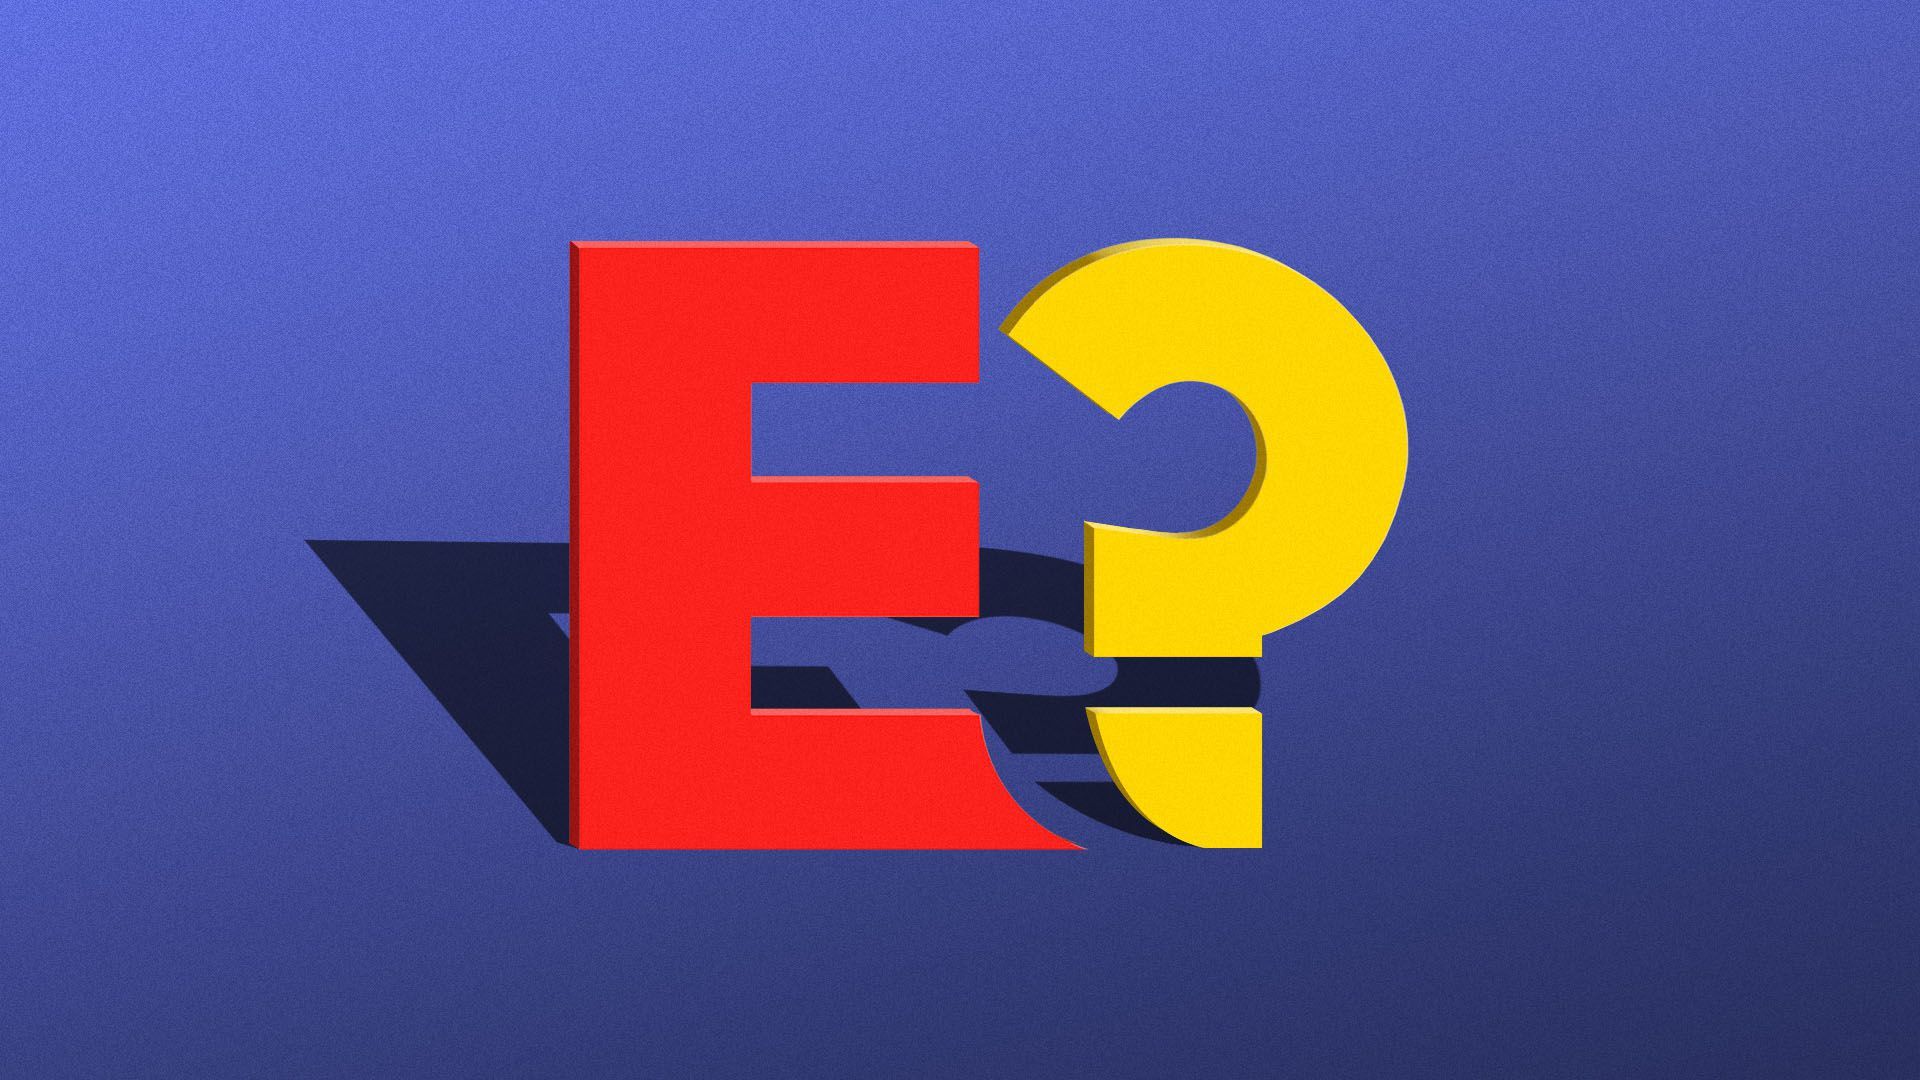 Illustration of the E3 logo with the 3 as a question mark